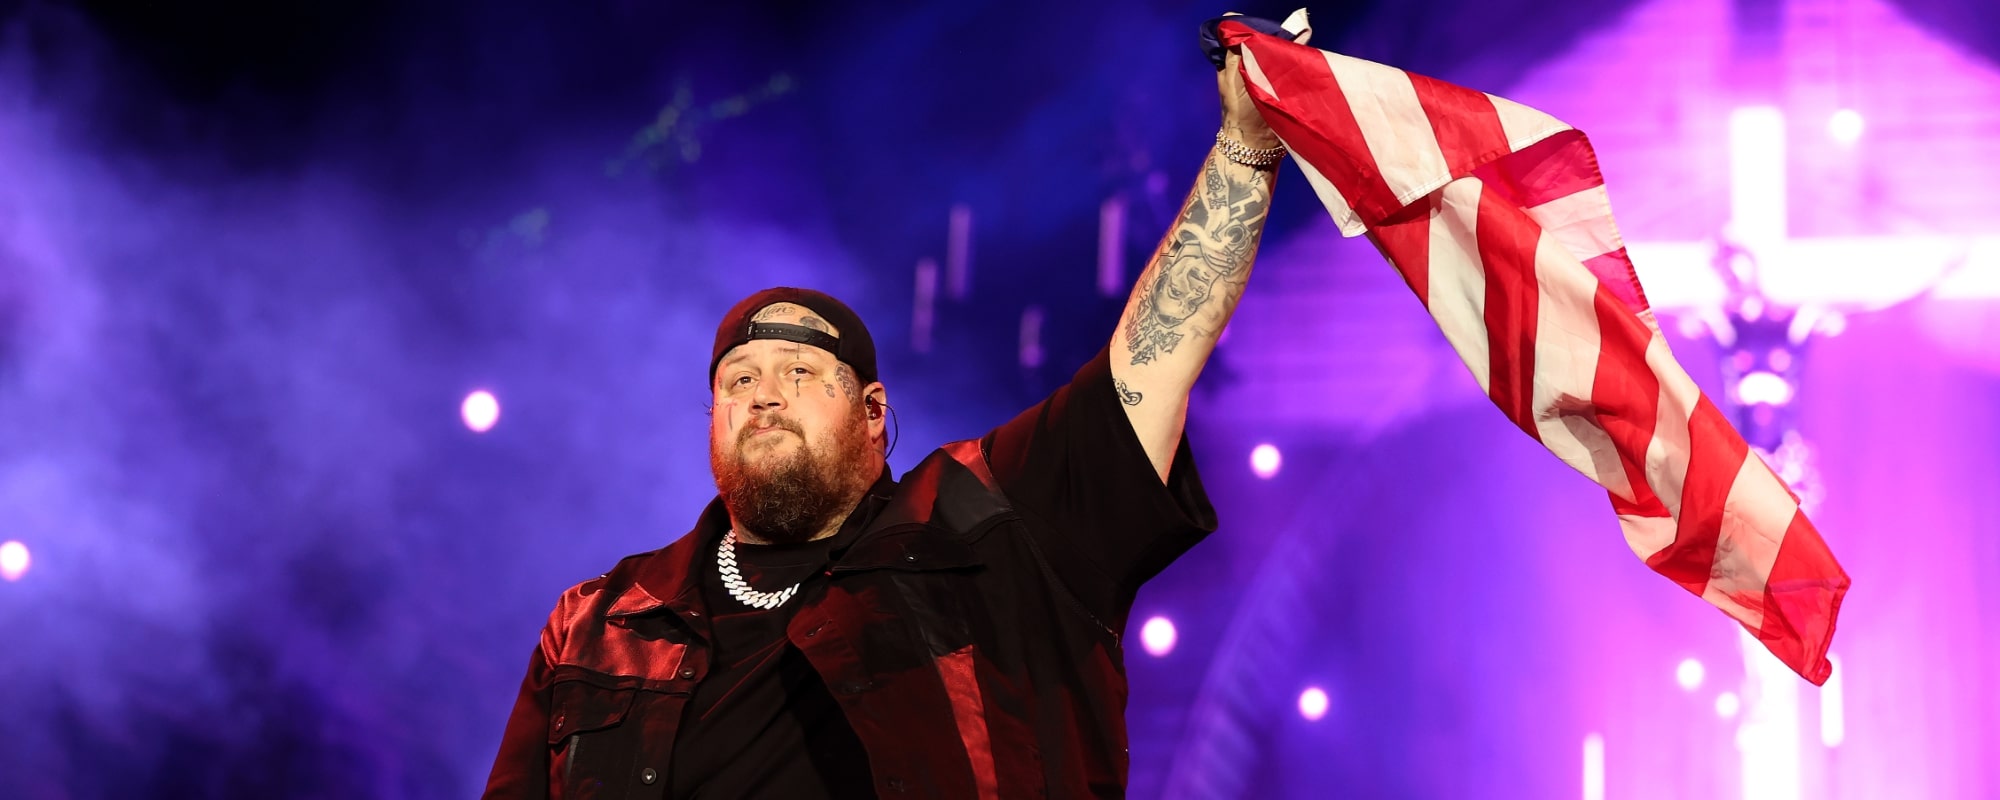 Watch Jelly Roll and T-Pain Honor Toby Keith at Stagecoach with “Should’ve Been a Cowboy”